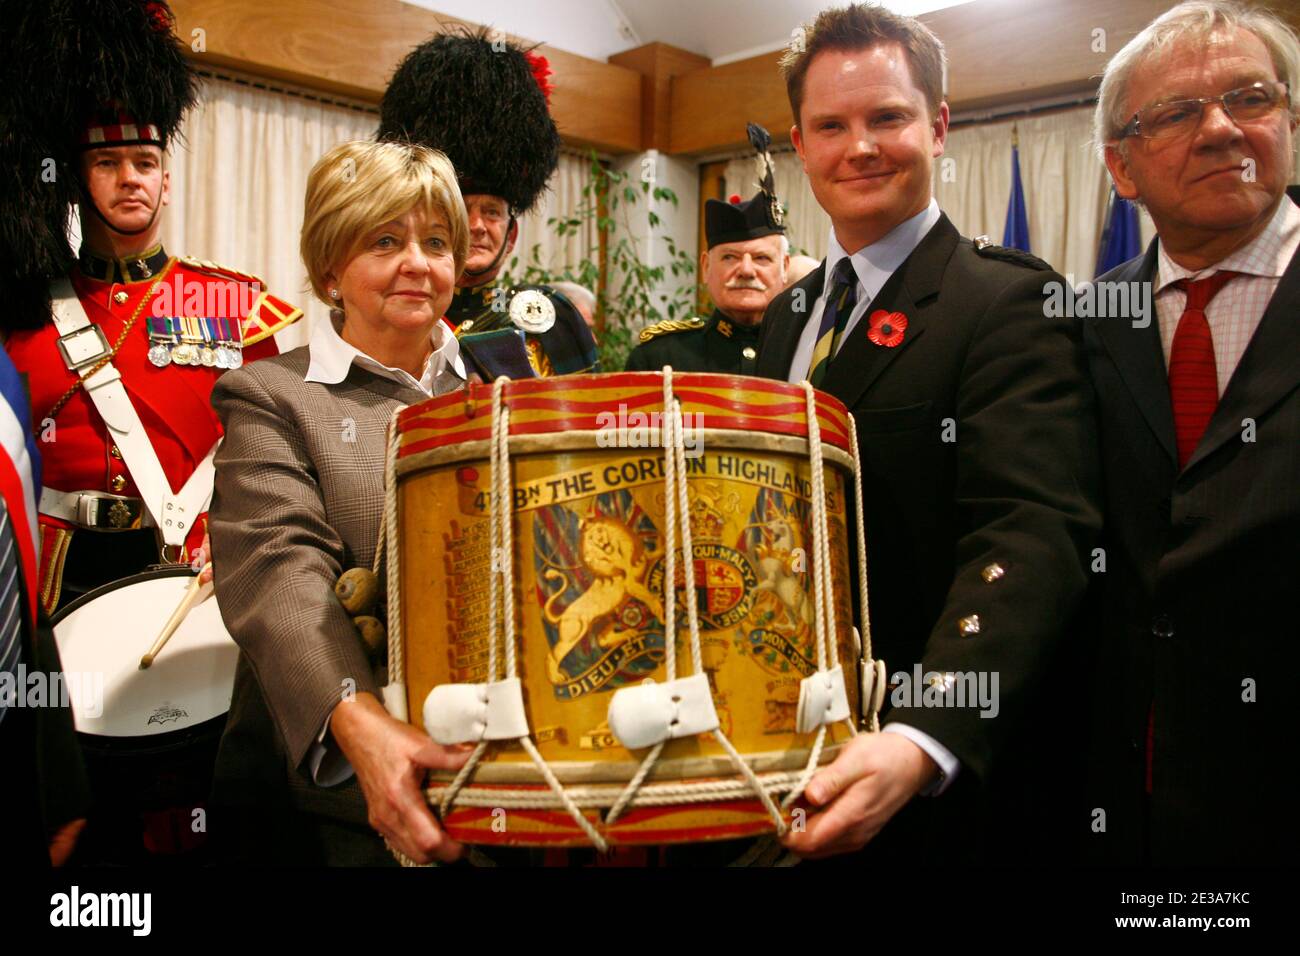 Pascale Osson (L) a desendant of French policeman, Seraphin Boulet, presents the Gordon Highlanders drum, which was was buried in a farmer's field by a British soldier of the 4th Battalion as the Gordons, during the British Army's retreat to Dunkirk in the Second World War, to curator, Jesper Ericsson (R) and representatives of the Gordon Highlanders Museum based in Aberdeen, Scotland, at a ceremony held in Hem, northern France on 12 November 2010. Media reports state that it has been revealed that, within hours of the 4th Battalion as the Gordons leaving the village of Hem in northern France, Stock Photo